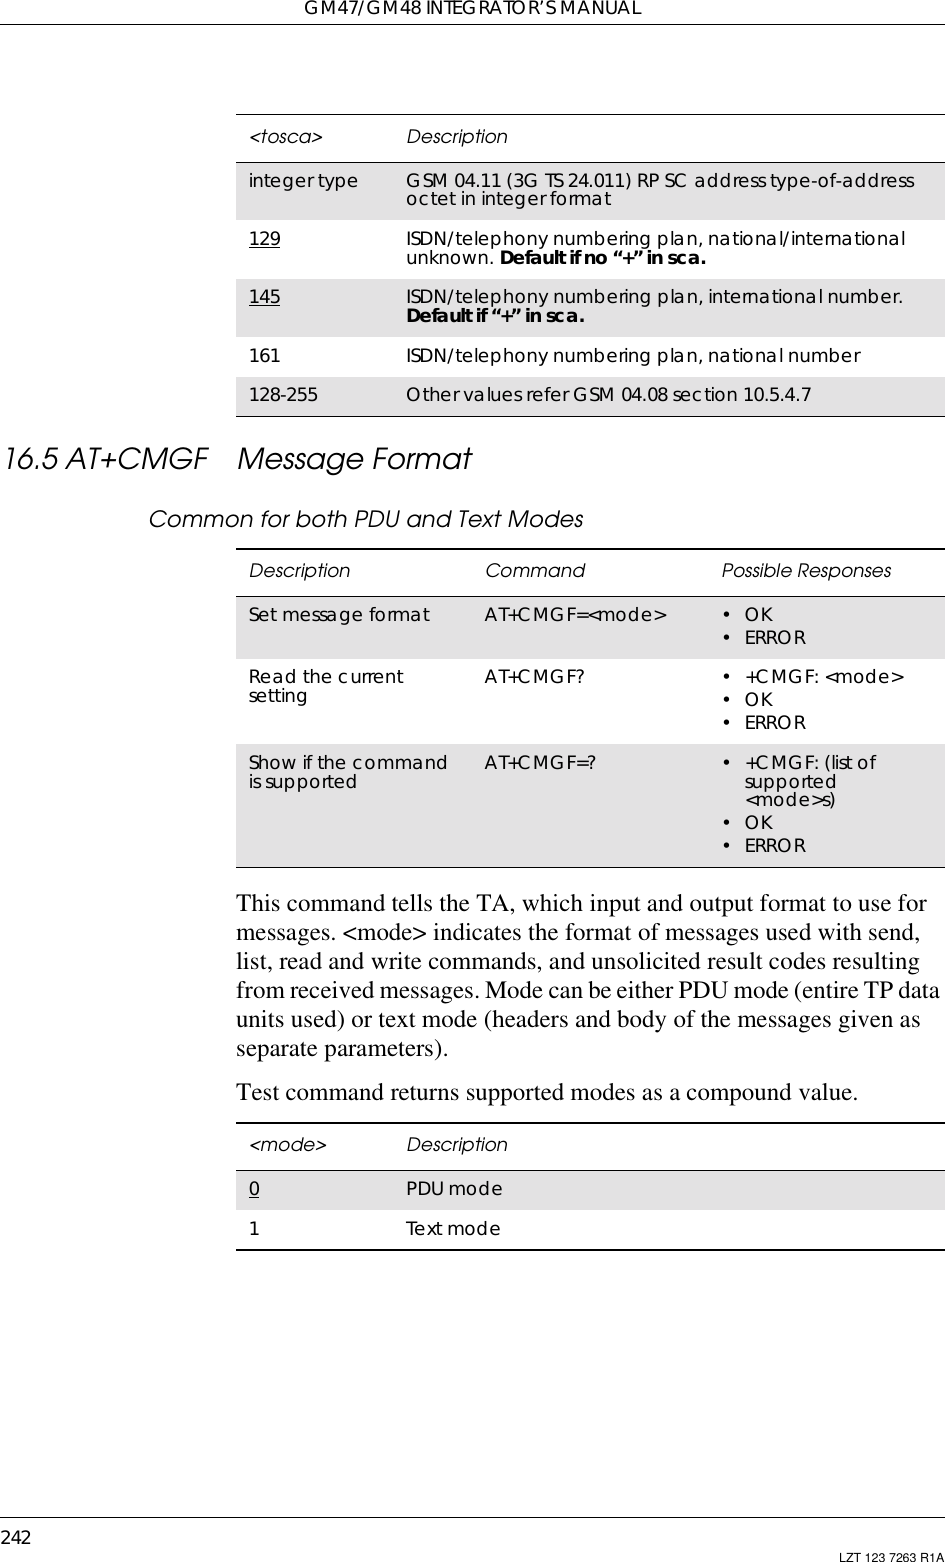 GM47/GM48 INTEGRATOR’S MANUAL242 LZT 123 7263 R1A16.5 AT+CMGF Message FormatCommon for both PDU and Text ModesThis command tells the TA, which input and output format to use formessages. &lt;mode&gt; indicates the format of messages used with send,list, read and write commands, and unsolicited result codes resultingfrom received messages. Mode can be either PDU mode (entire TP dataunits used) or text mode (headers and body of the messages given asseparate parameters).Test command returns supported modes as a compound value.&lt;tosca&gt; Descriptioninteger type GSM 04.11 (3G TS 24.011) RP SC address type-of-addressoctet in integer format129 ISDN/telephony numbering plan, national/internationalunknown. Default if no “+” in sca.145 ISDN/telephony numbering plan, international number.Default if “+” in sca.161 ISDN/telephony numbering plan, national number128-255 Other values refer GSM 04.08 section 10.5.4.7Description Command Possible ResponsesSet message format AT+CMGF=&lt;mode&gt; •OK•ERRORRead the currentsetting AT+CMGF? •+CMGF:&lt;mode&gt;•OK•ERRORShow if the commandis supported AT+CMGF=? •+CMGF:(listofsupported&lt;mode&gt;s)•OK•ERROR&lt;mode&gt; Description0PDU mode1Text mode